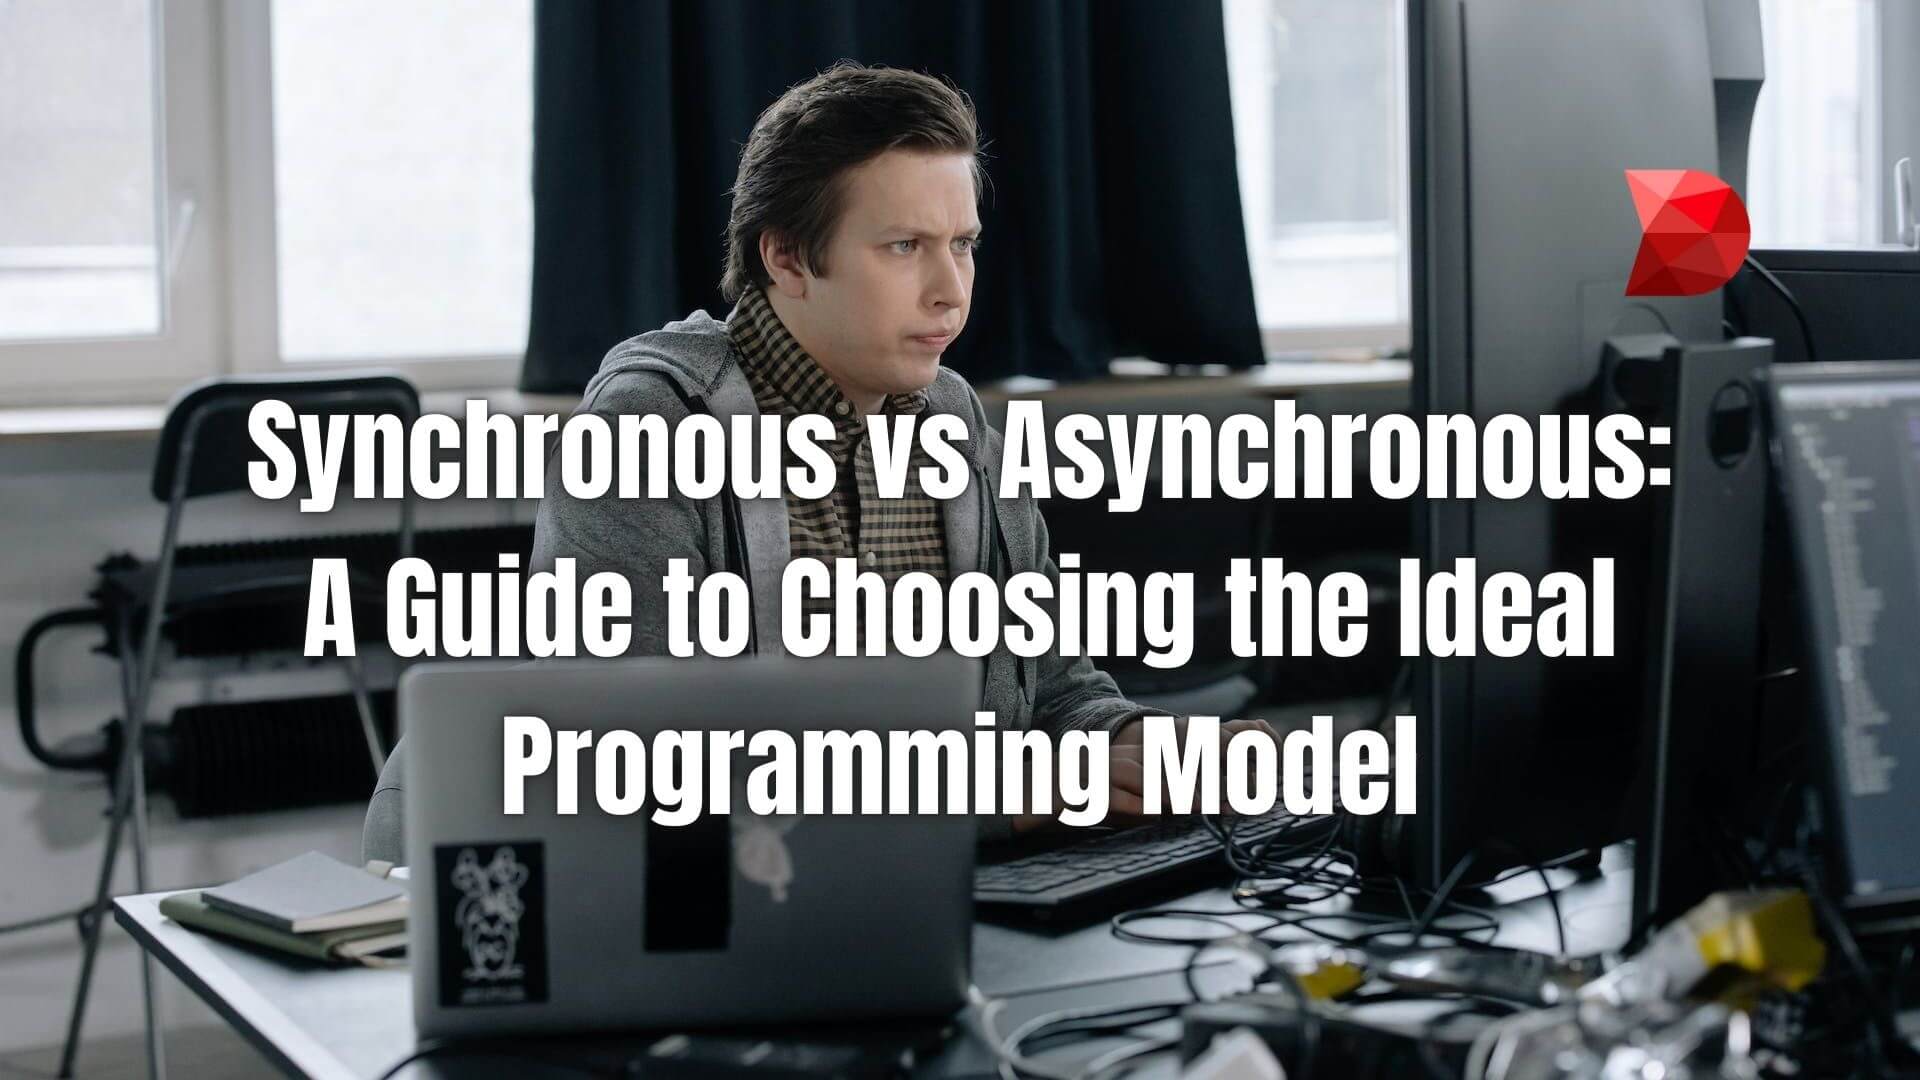 Explore the differences between synchronous vs. asynchronous programming models. Here's a guide to choosing the right model for your needs.